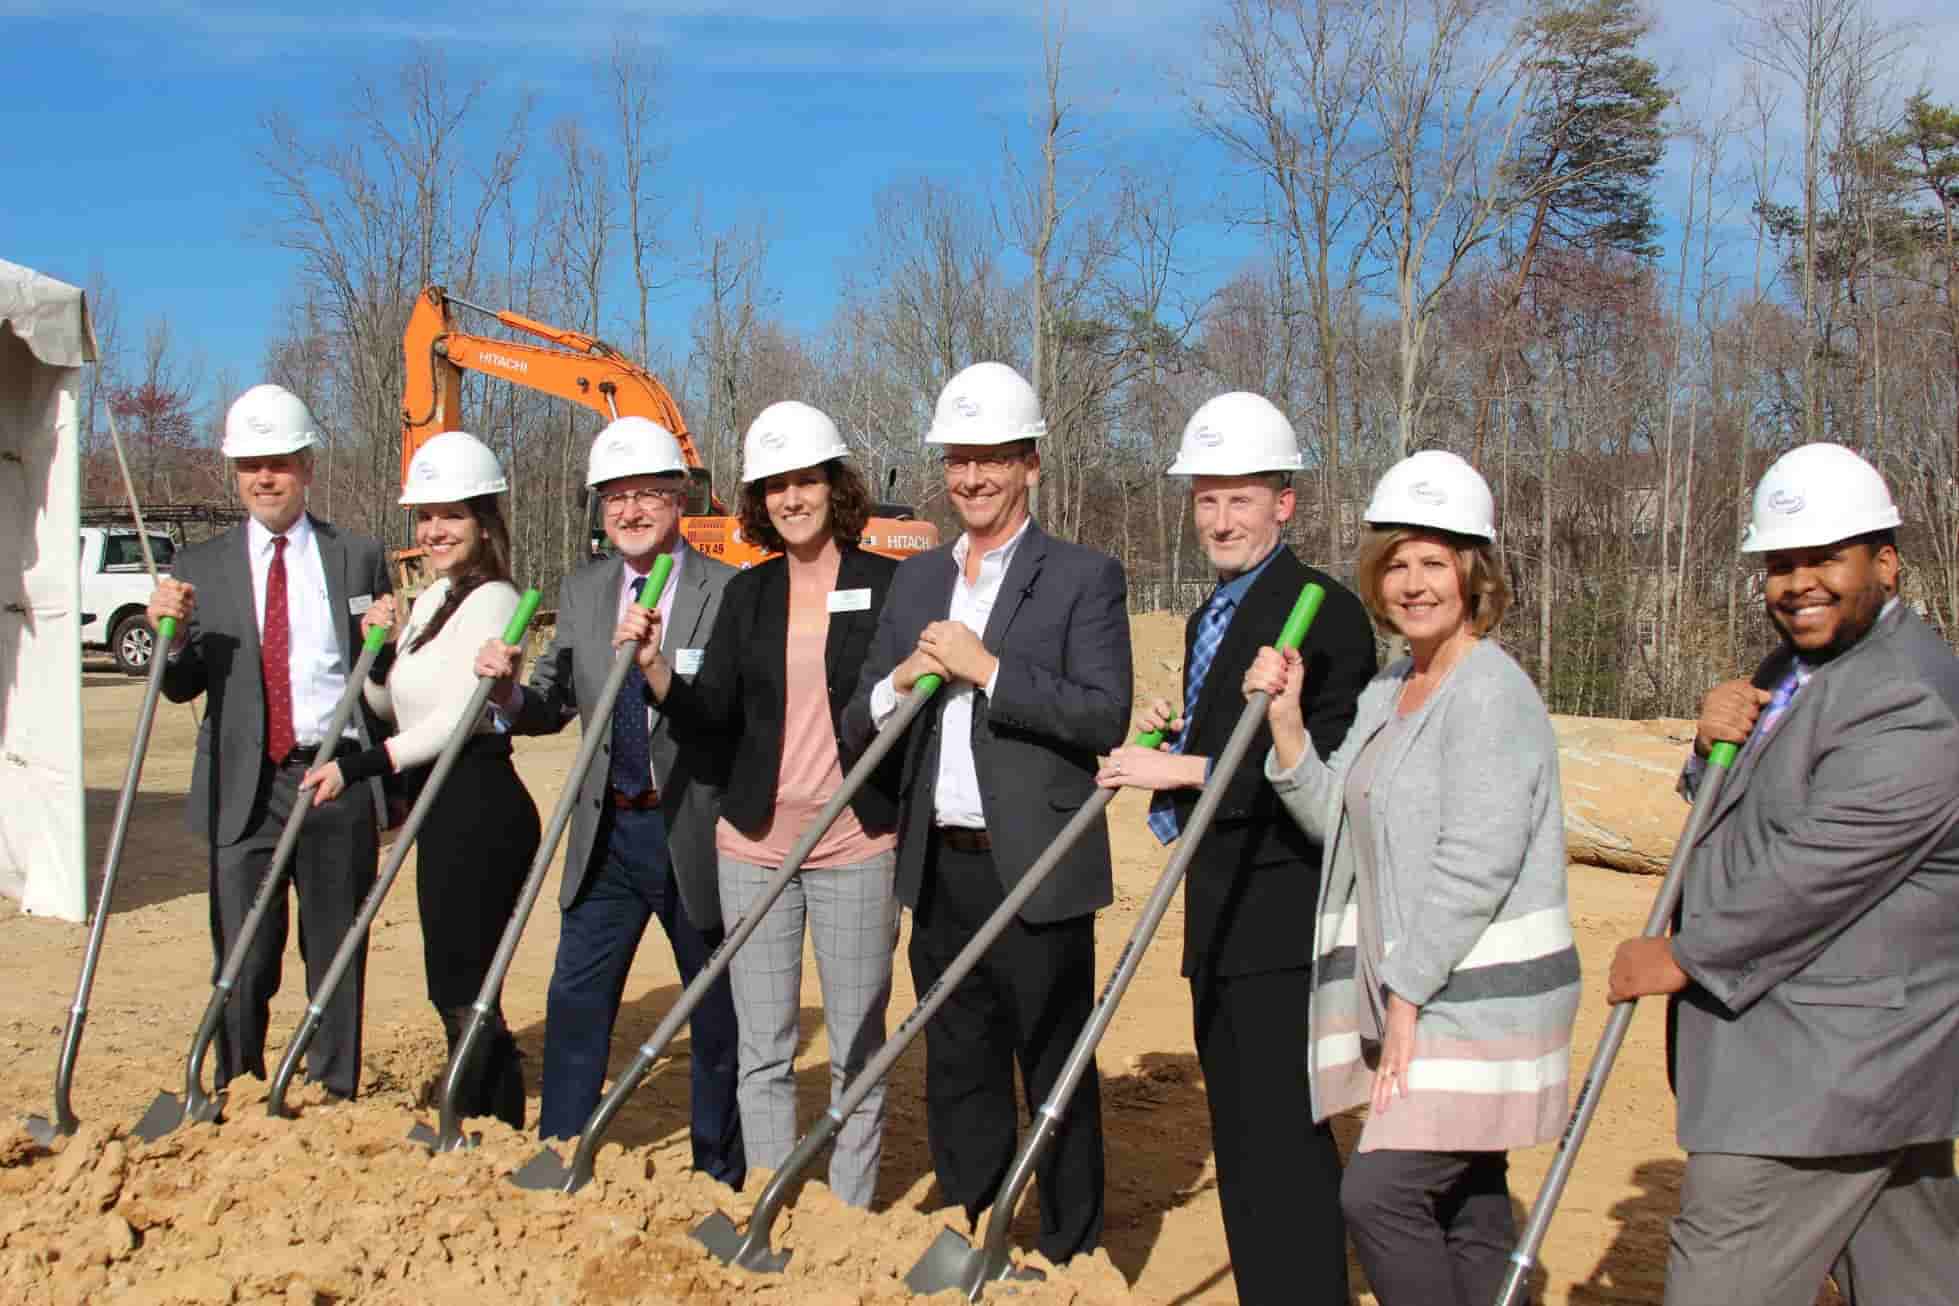 Executives from Saber Healthcare Group joined local officials to break ground on Saber’s new healthcare facility Berea Health & Rehabilitation Center in Fredericksburg.